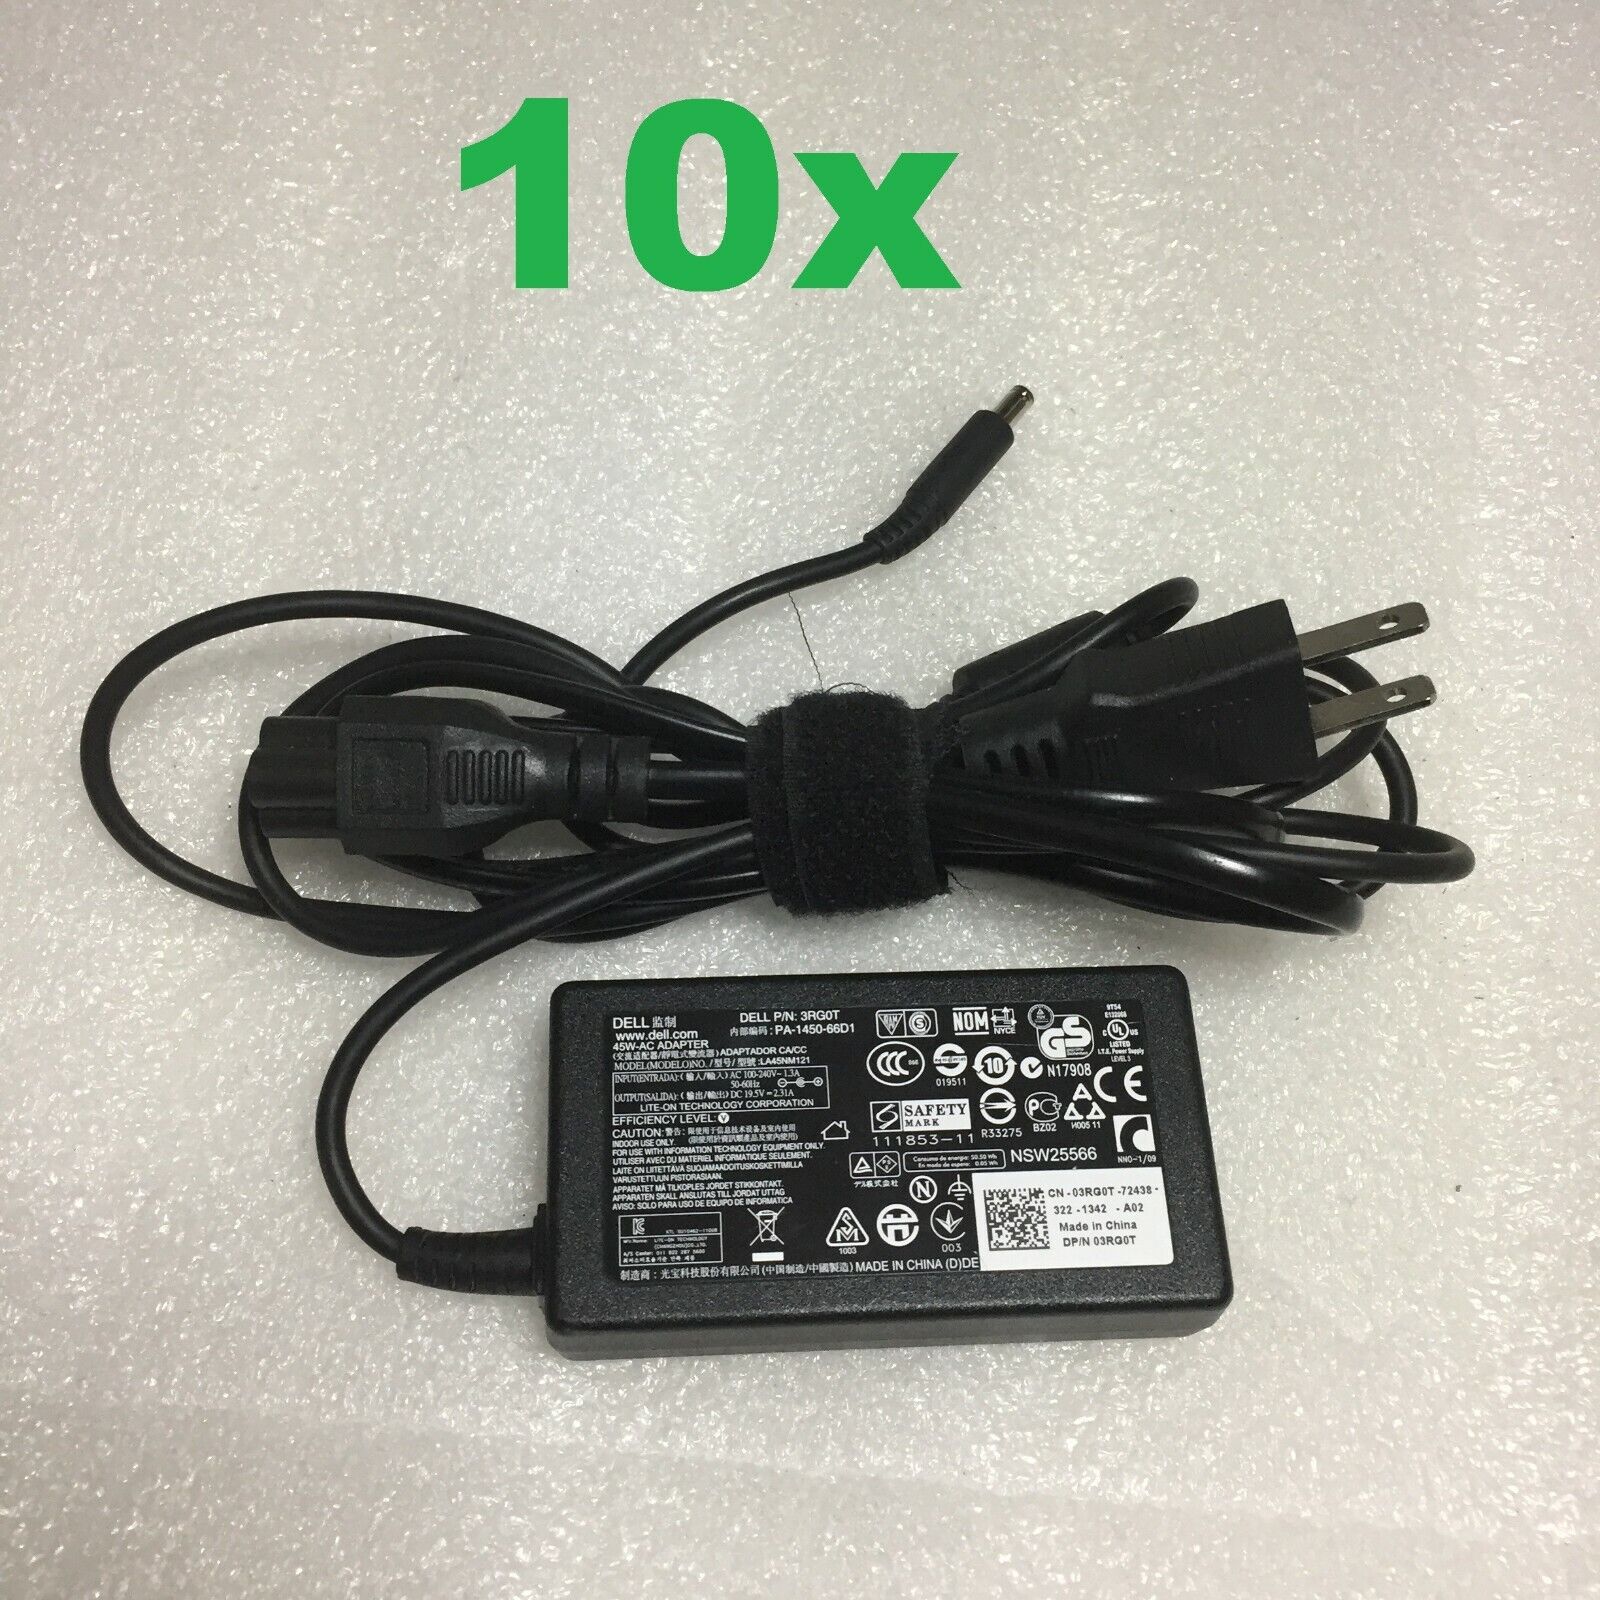 Lot of 10 Genuine Dell 45W AC Adapter Charger 4.0mm*3.0mm Small Tip 